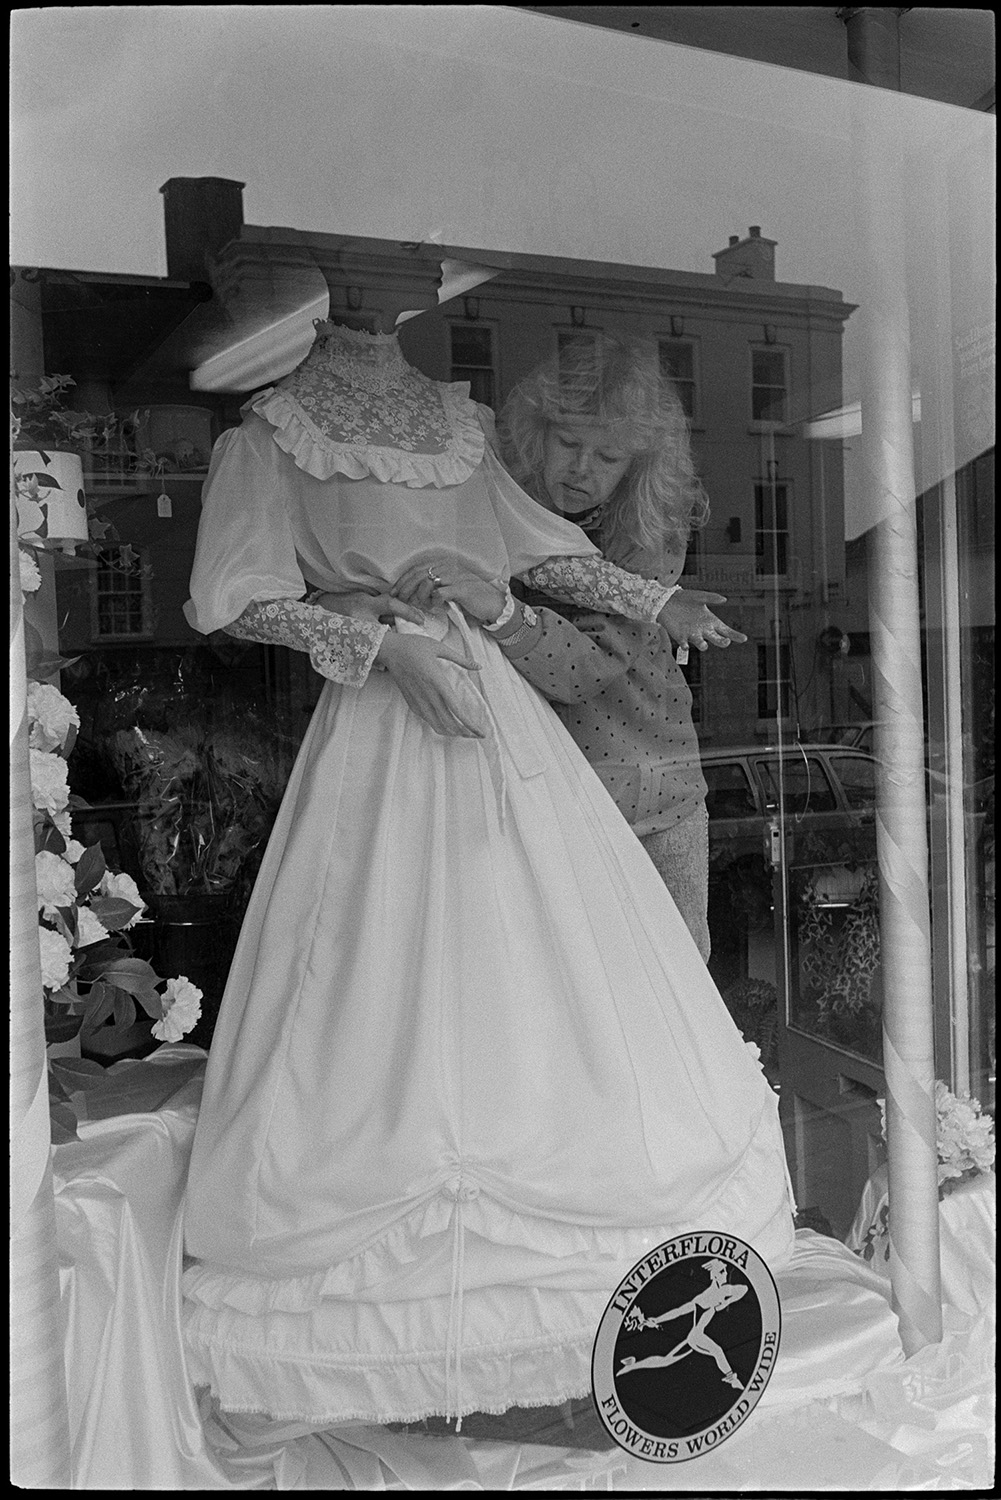 Man and woman arranging Easter wedding display in florists shop window.
[A woman arranging a wedding dress in a florists shop window display for Easter in South Molton.]